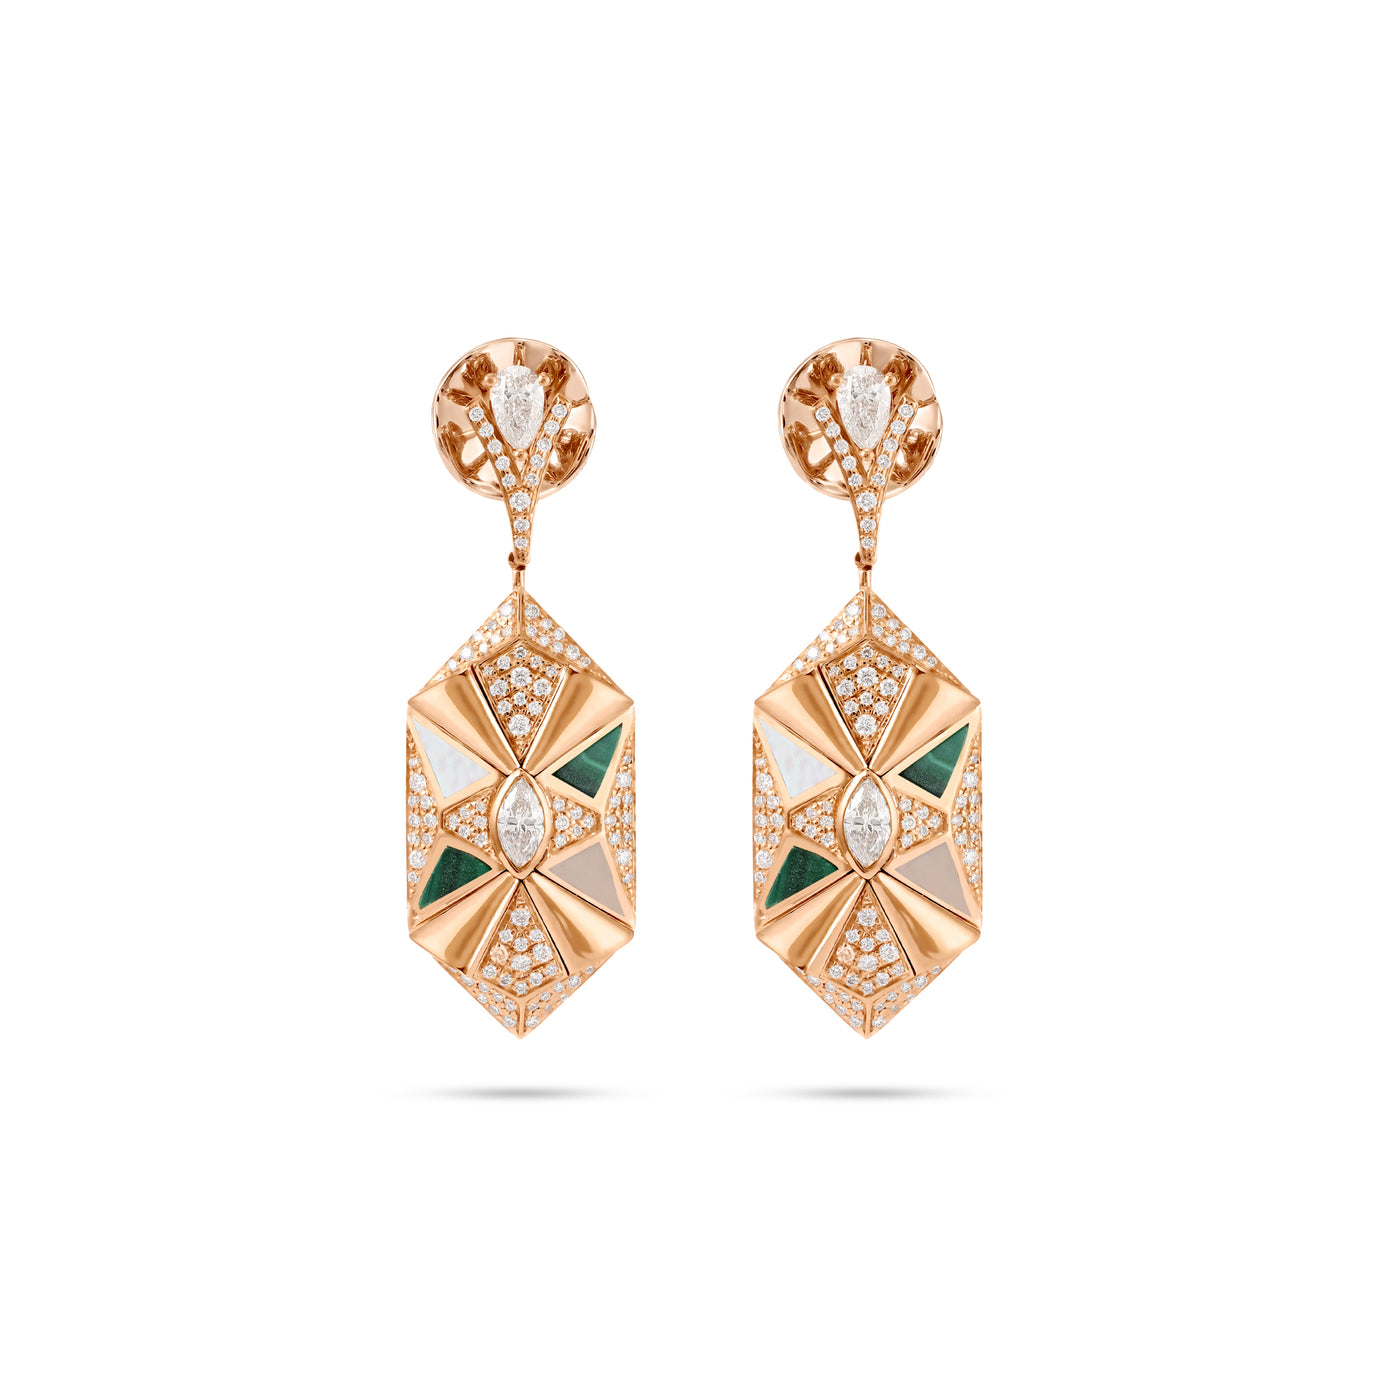 Rose Gold Diamond Earring with Malachite and Mather of pearl